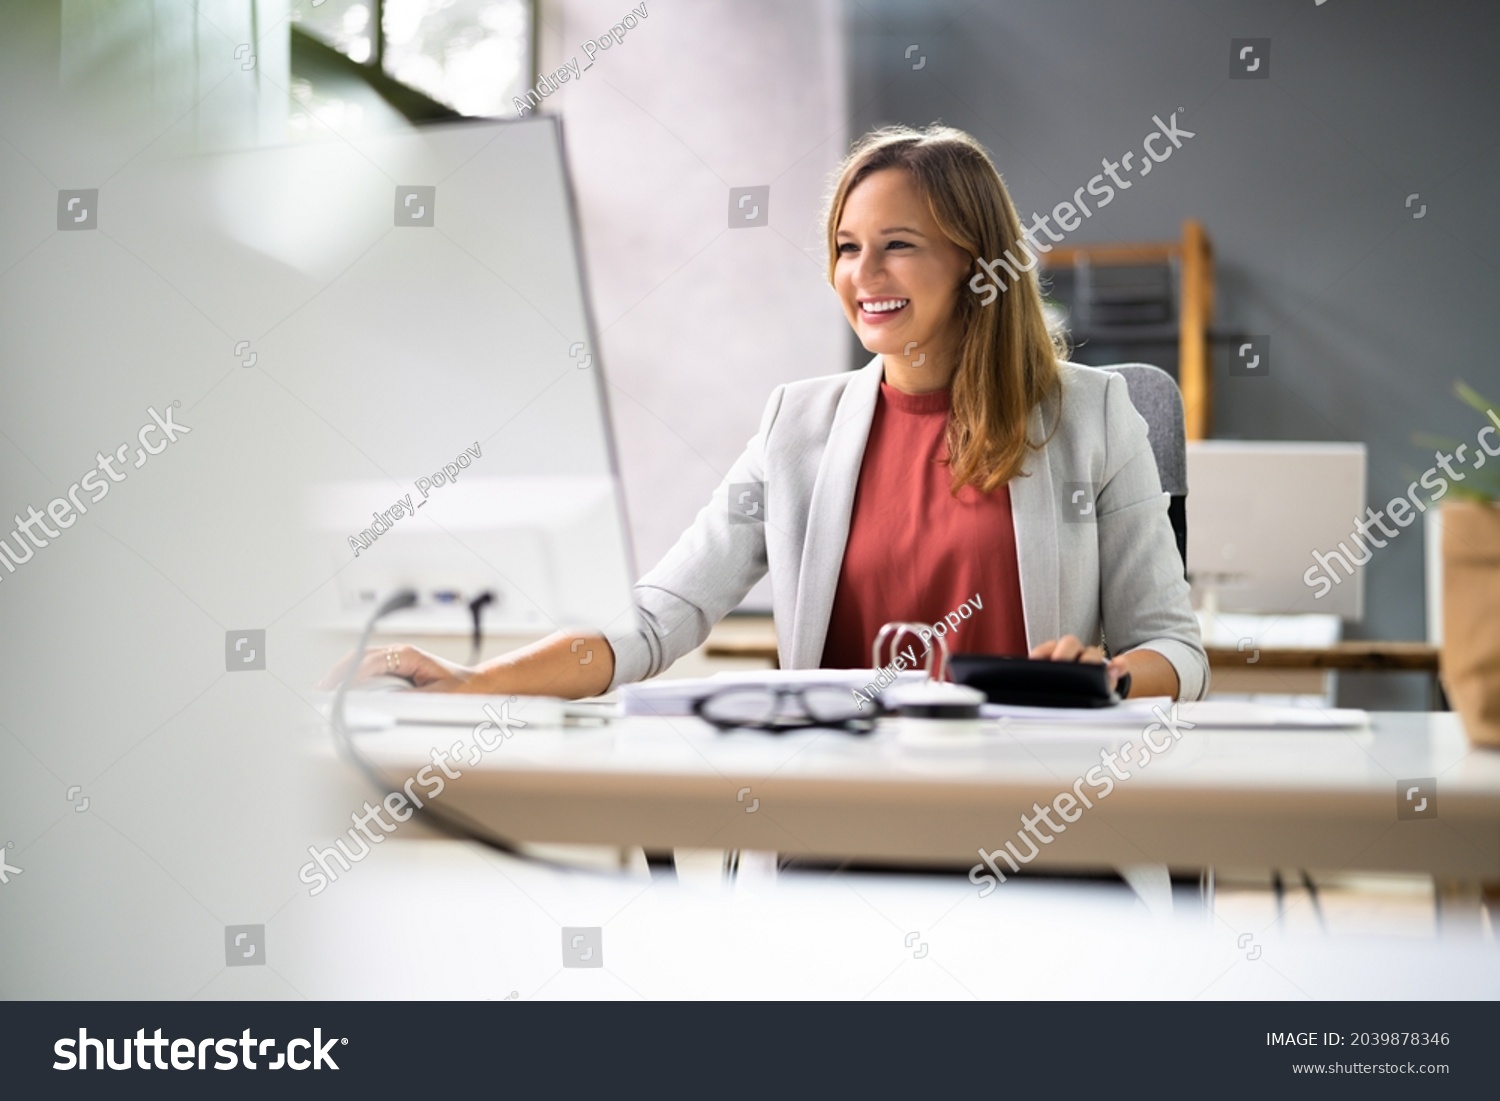 Accountant Women At Desk Using Calculator For Accounting #2039878346